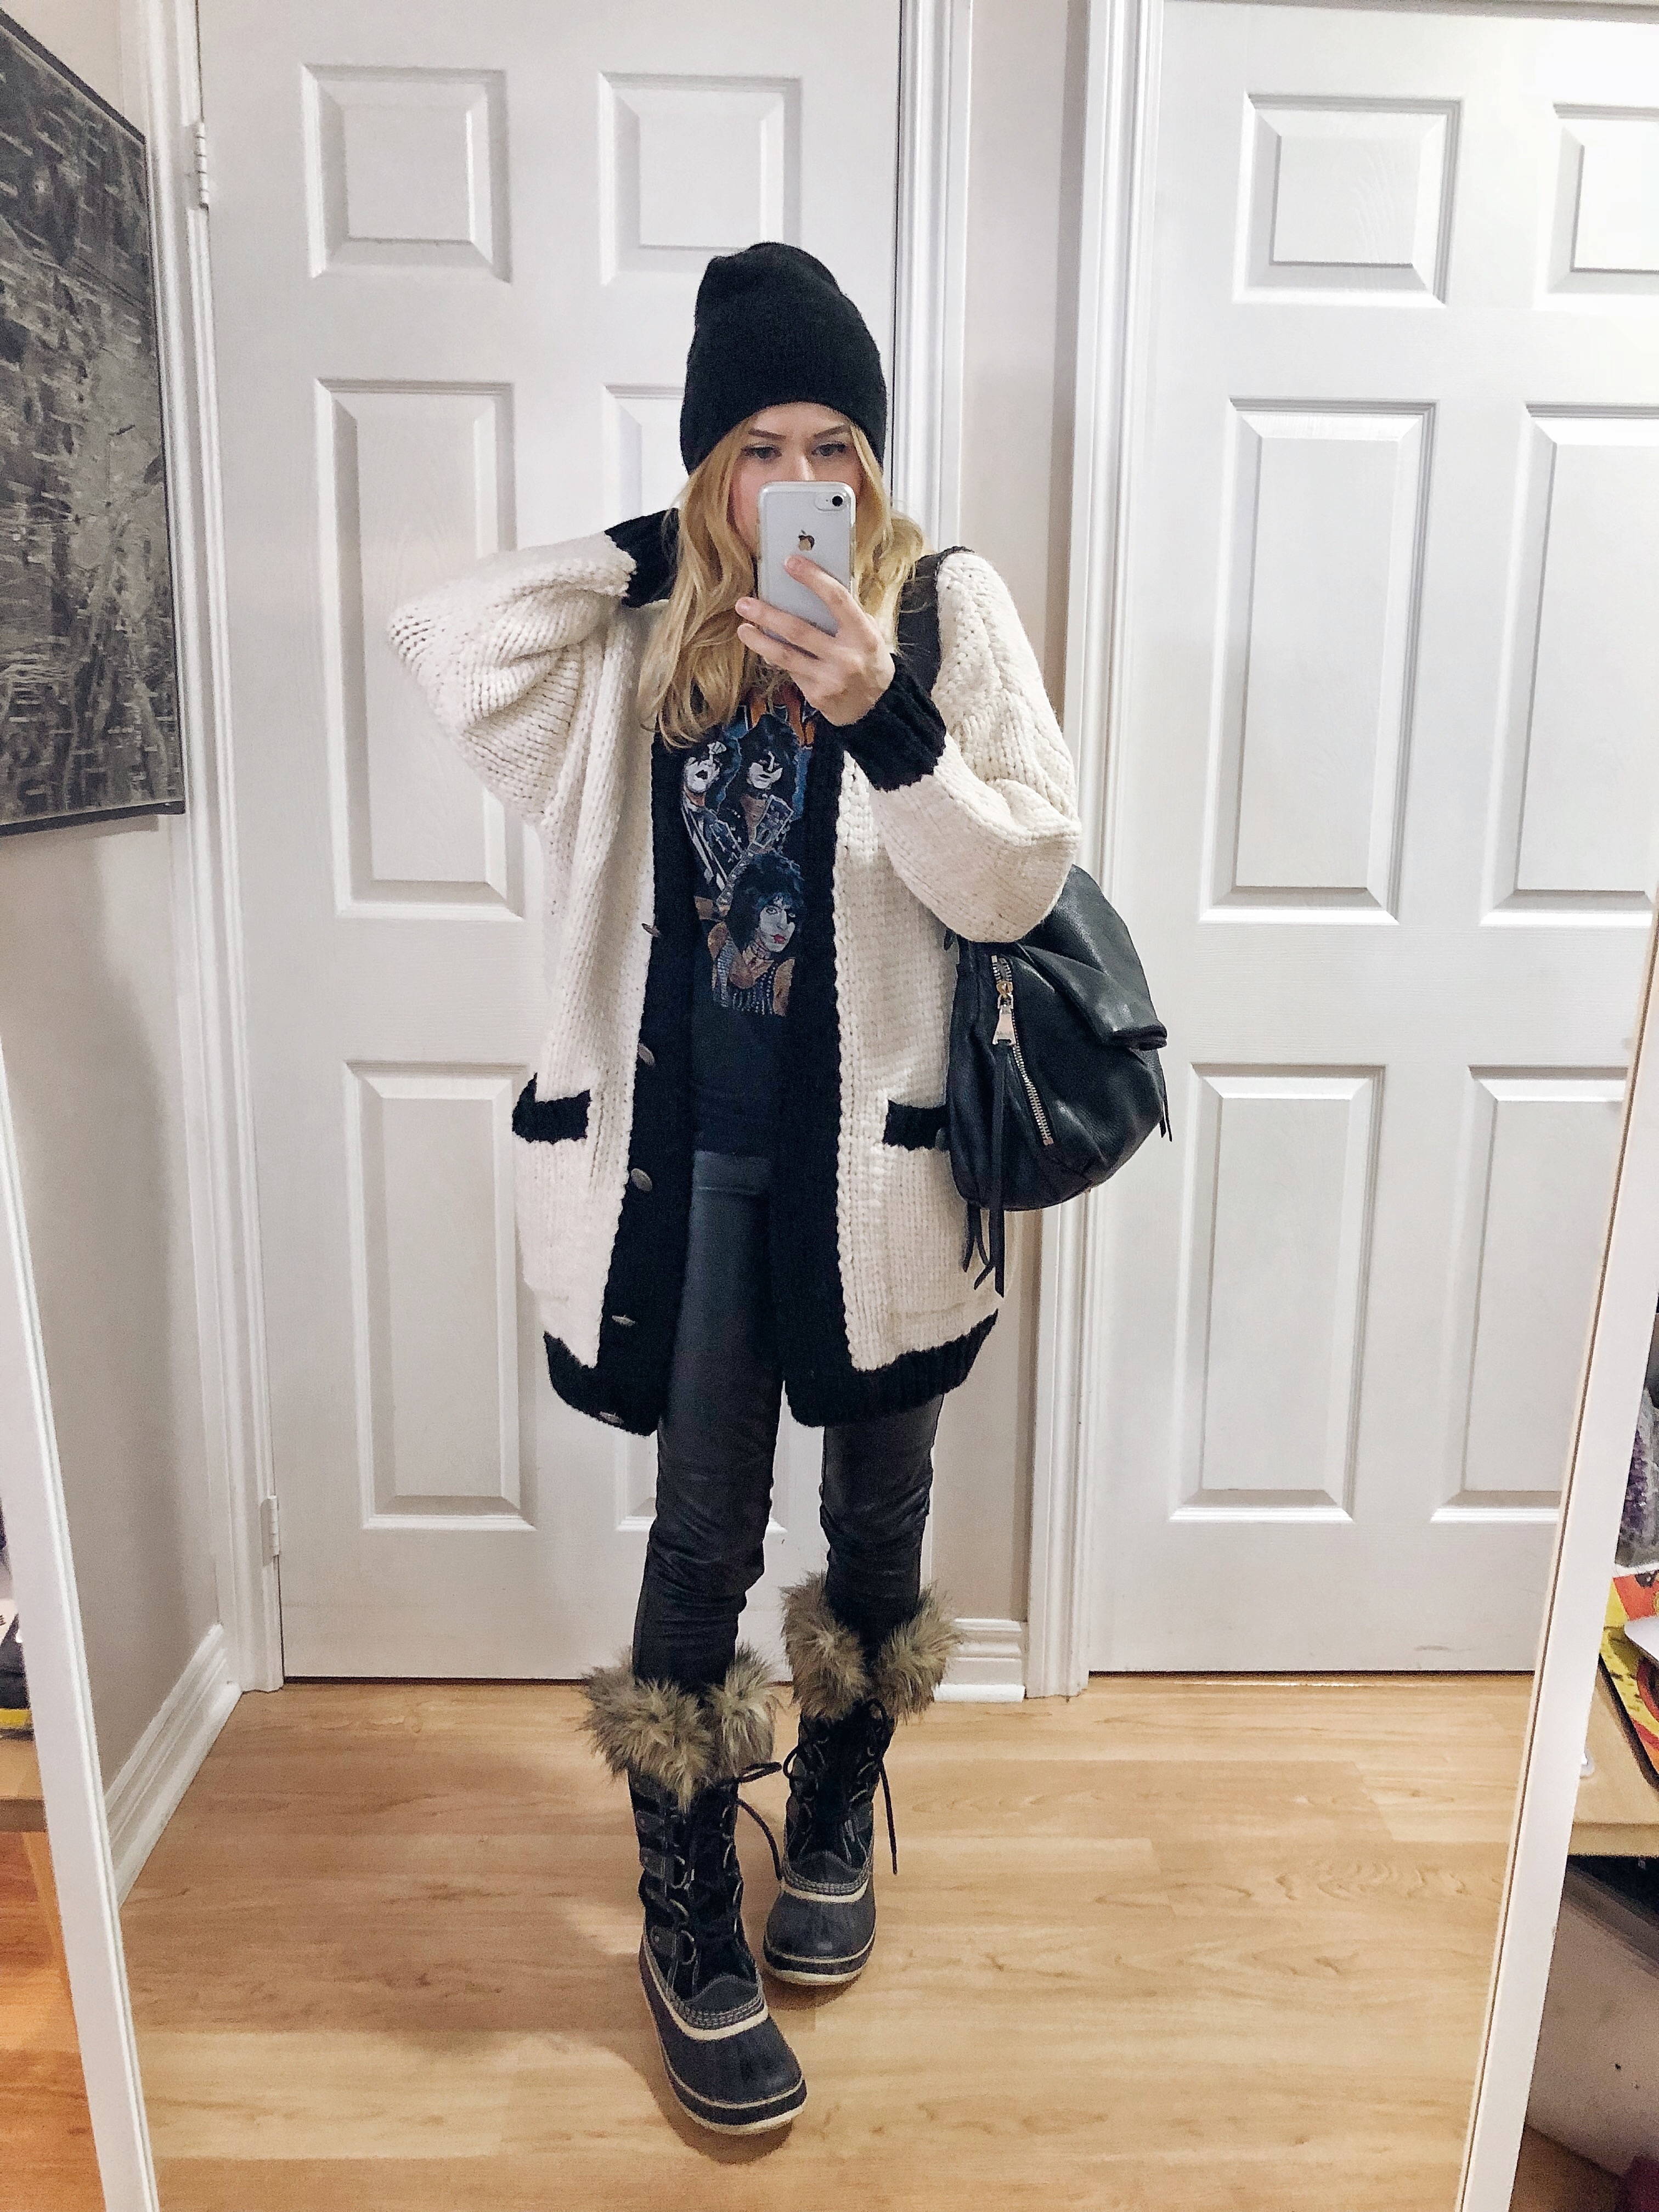 What I Wore. I am wearing a kiss t-shirt, oversized cardigan, black faux leather leggings, and black Sorel Joan of Arctic boots.